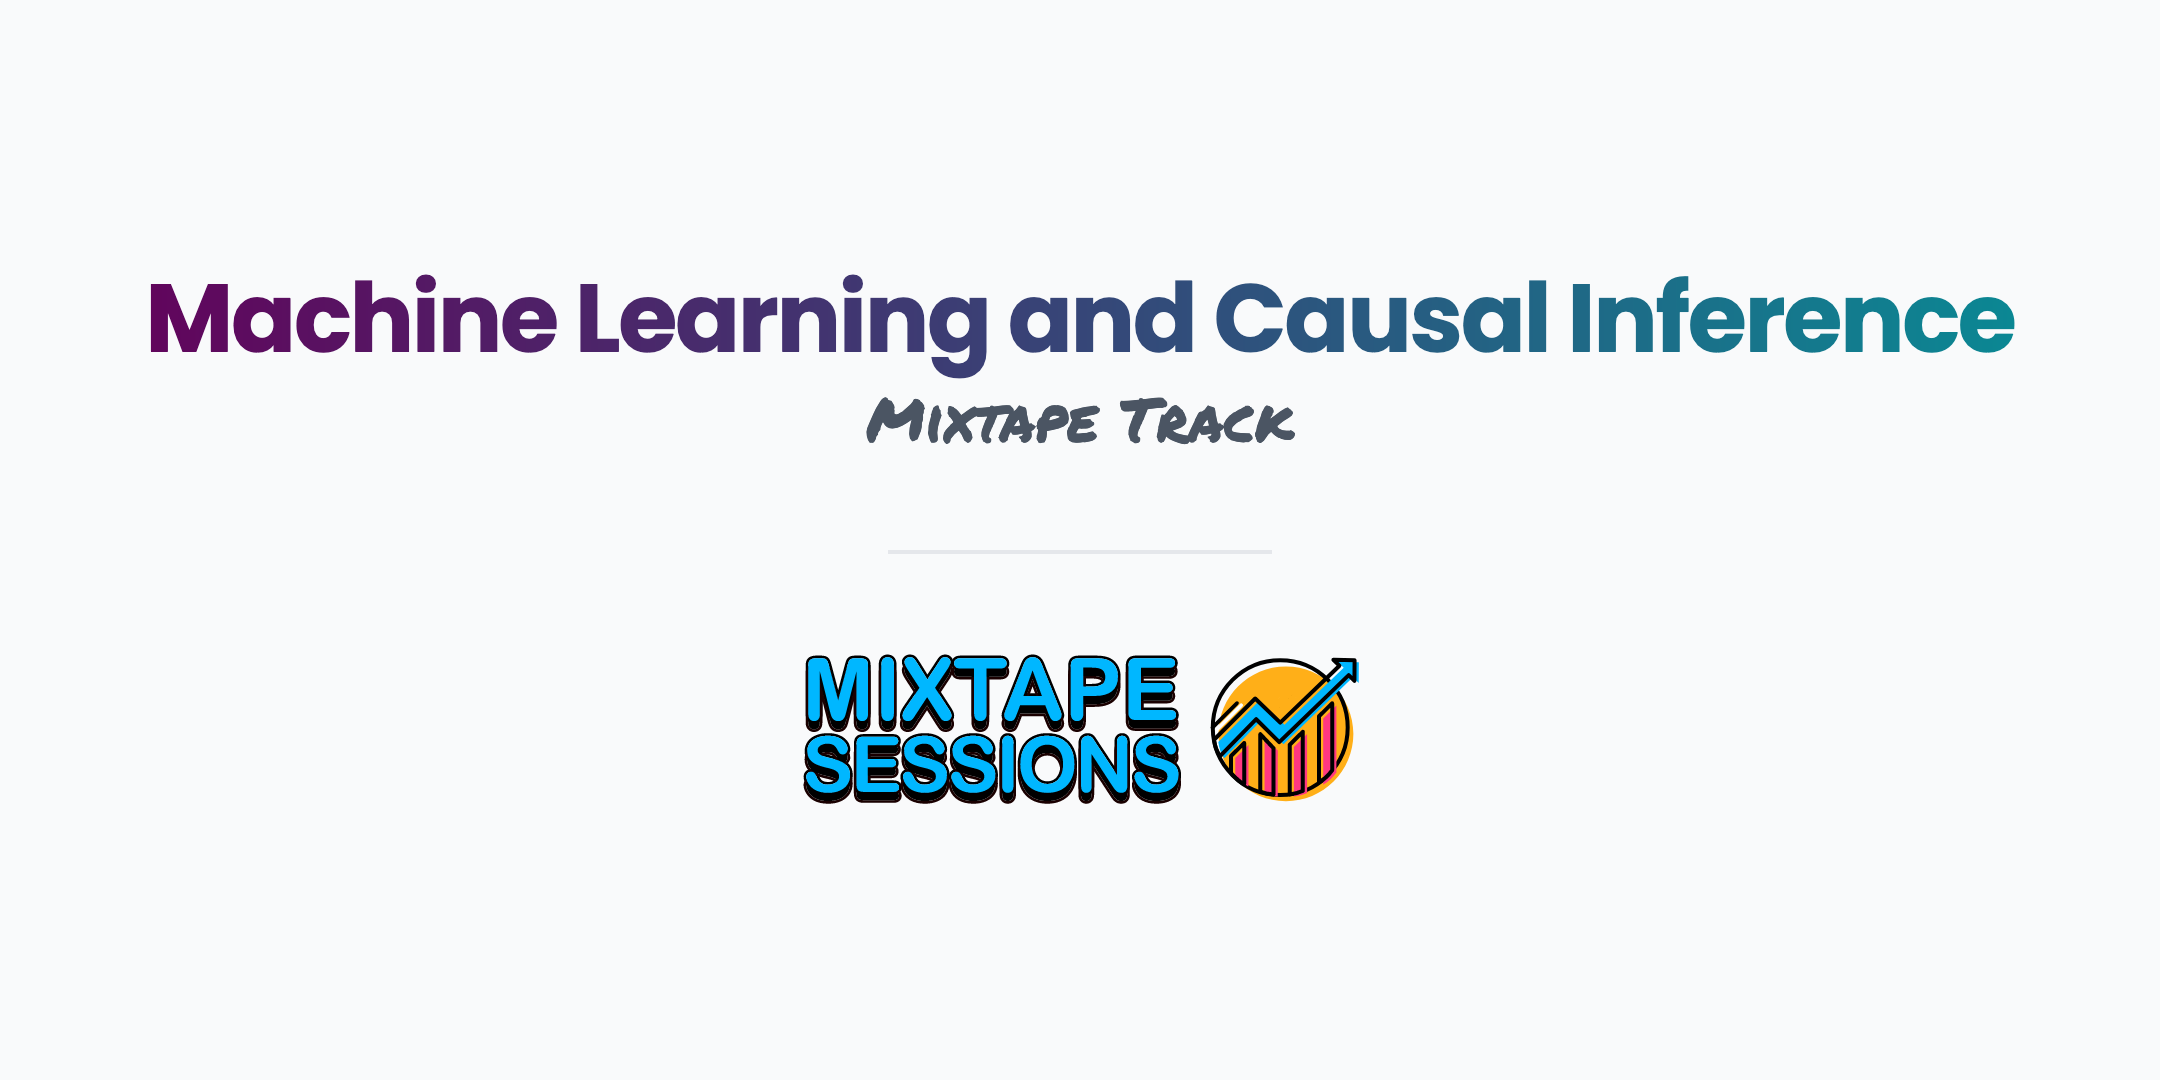 Mixtape Sessions Banner